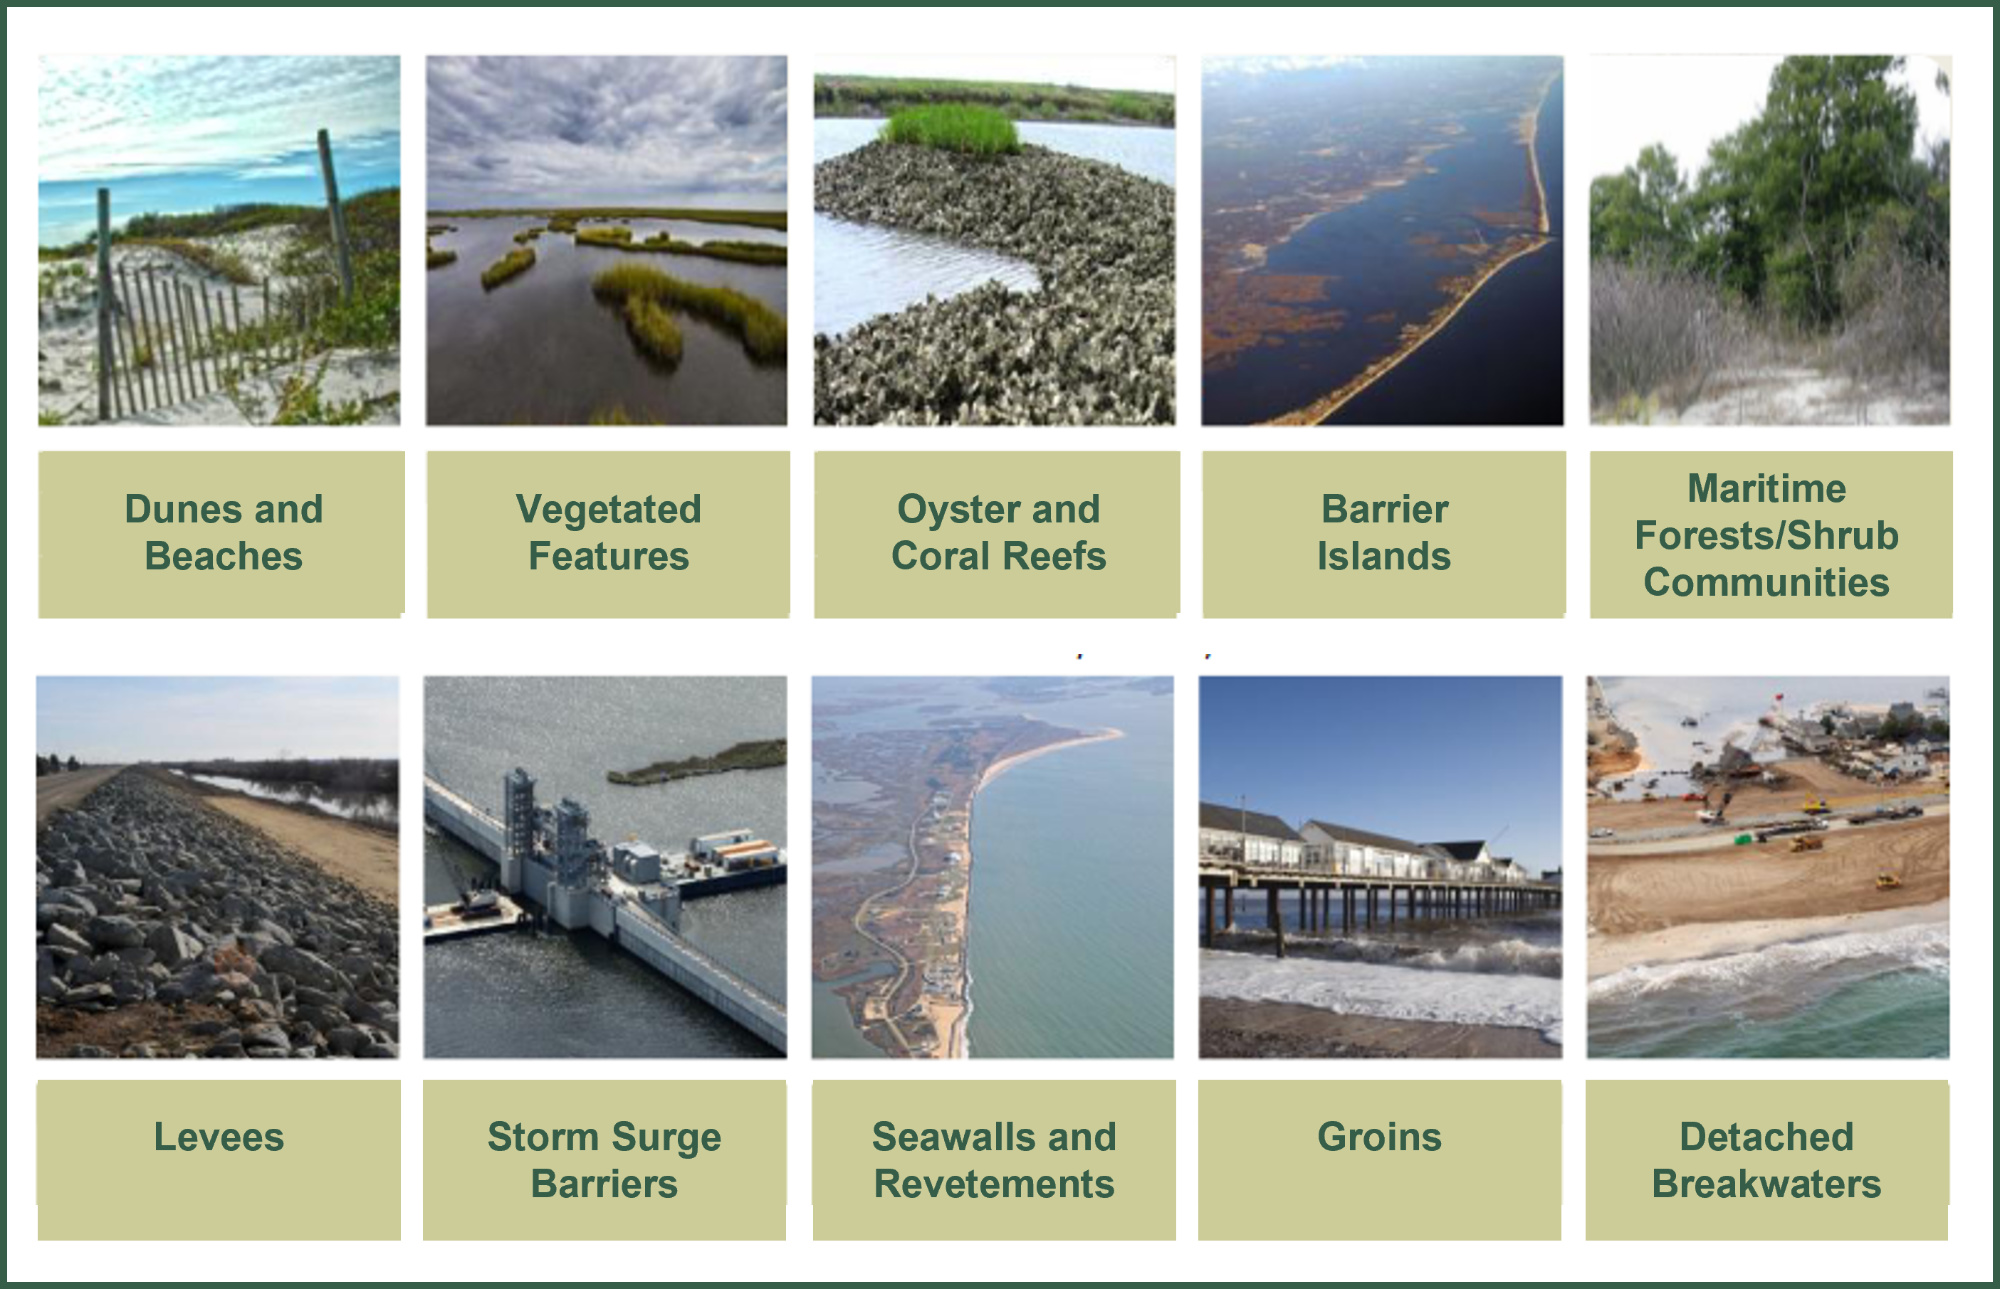 An image with thumbnail images illustrating a variety of measures that could be used to stabilize and protect the coast, both nature-based and structure-based.